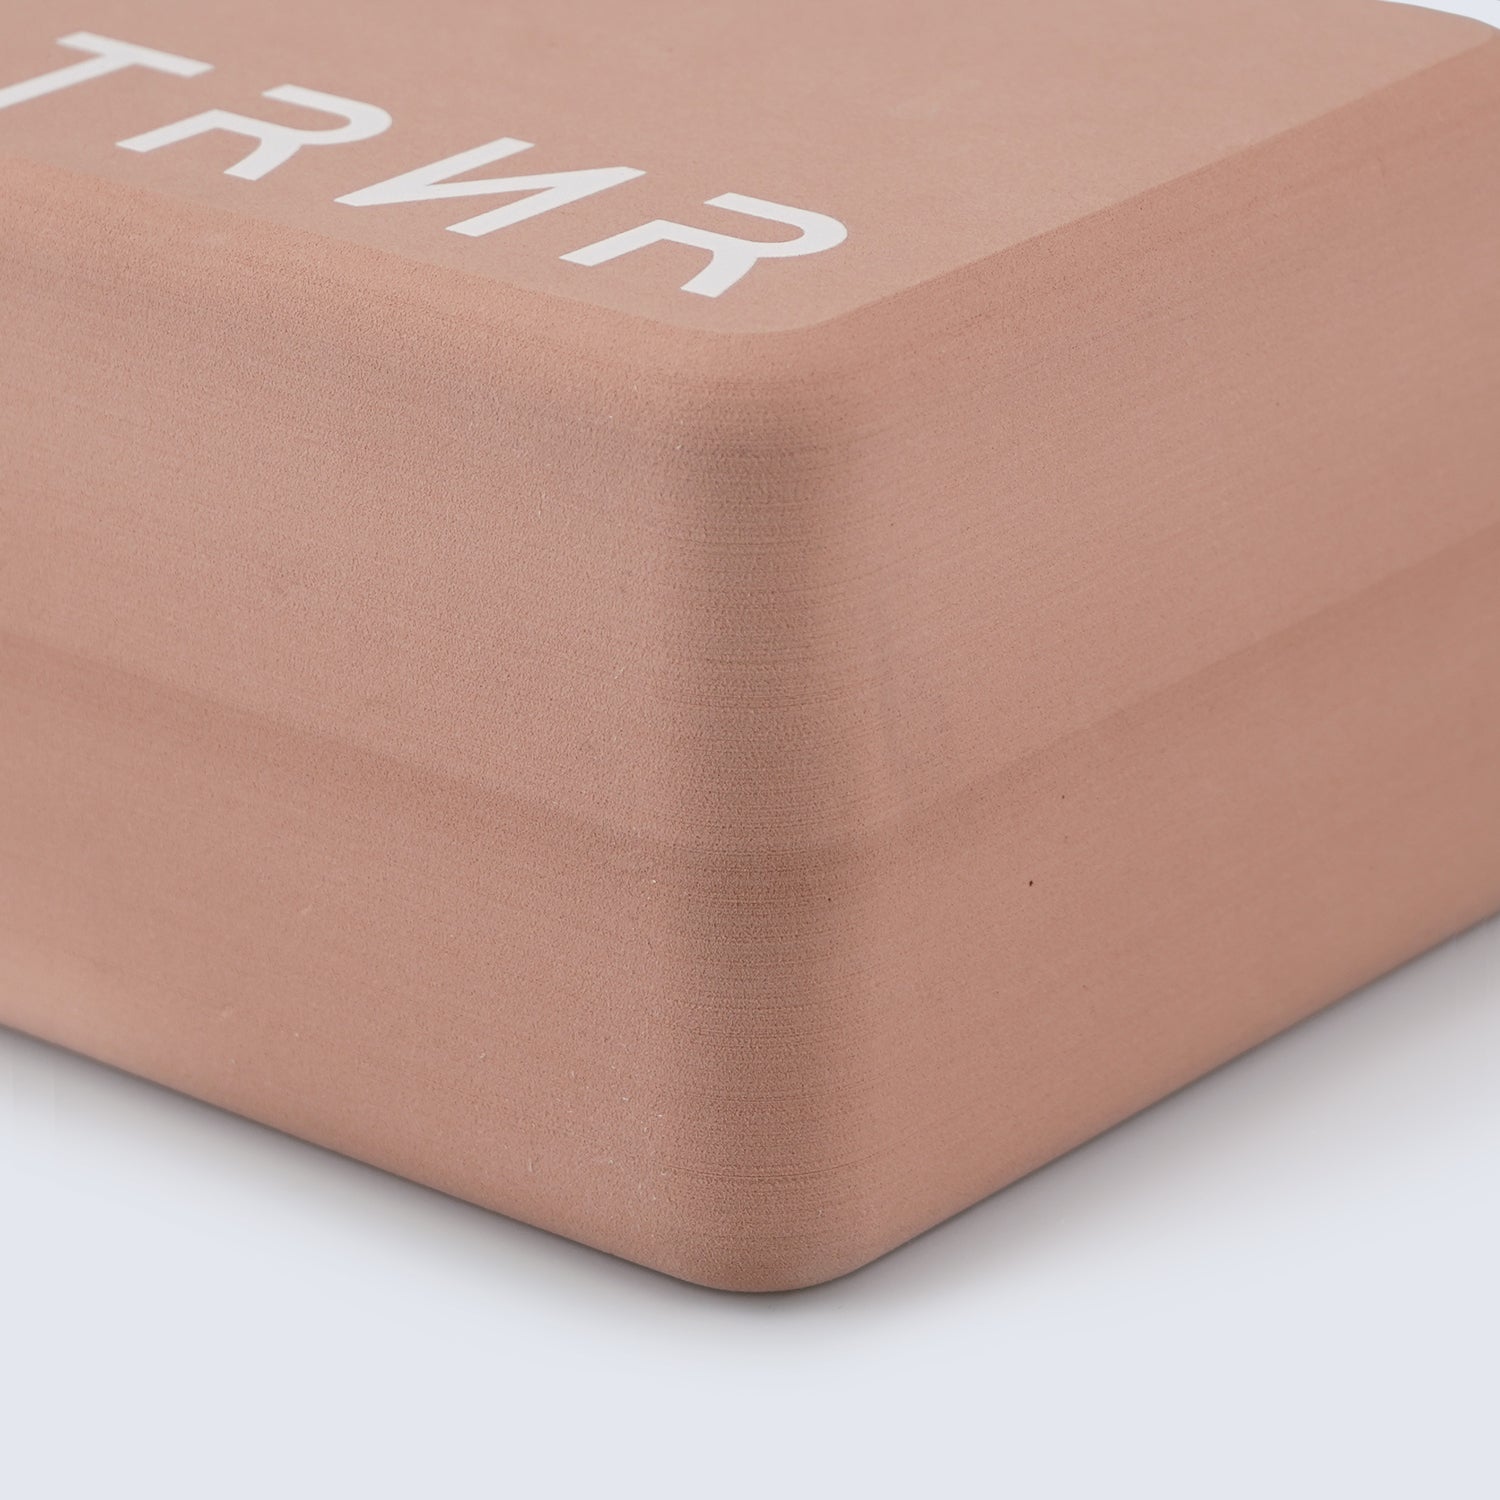 Close-Up Shot of the TRNR Elevate Block | High-Density EVA Foam | Clay Colour | Oversized for Greater Support and Stability